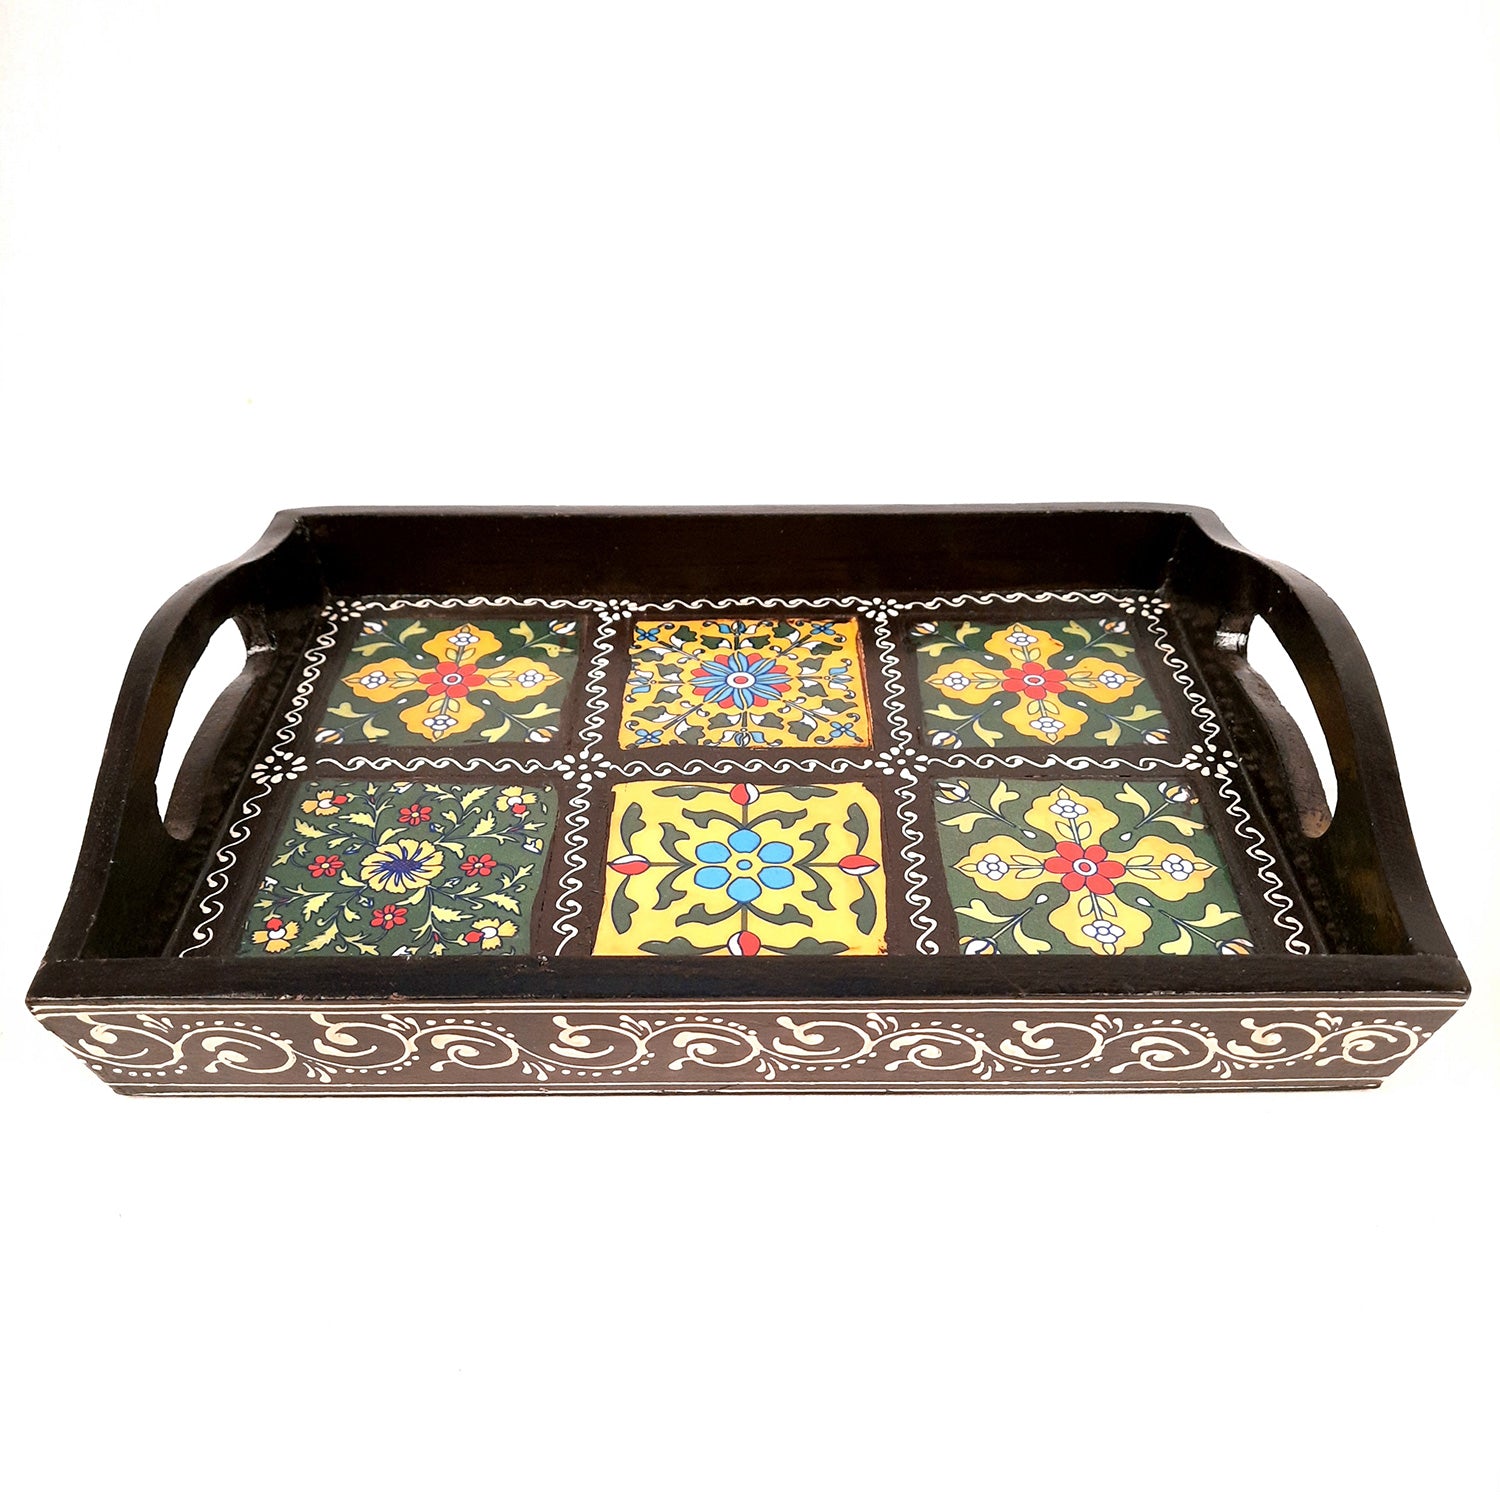 Serving Tray With In Built Ceramic Tiles | Tea & Snacks Serving Platter Wooden | Tray With Handles - for Home, Dining Table, Kitchen Decor, Restaurants, Office, Cafe & Gifts - 12 Inch - Apkamart